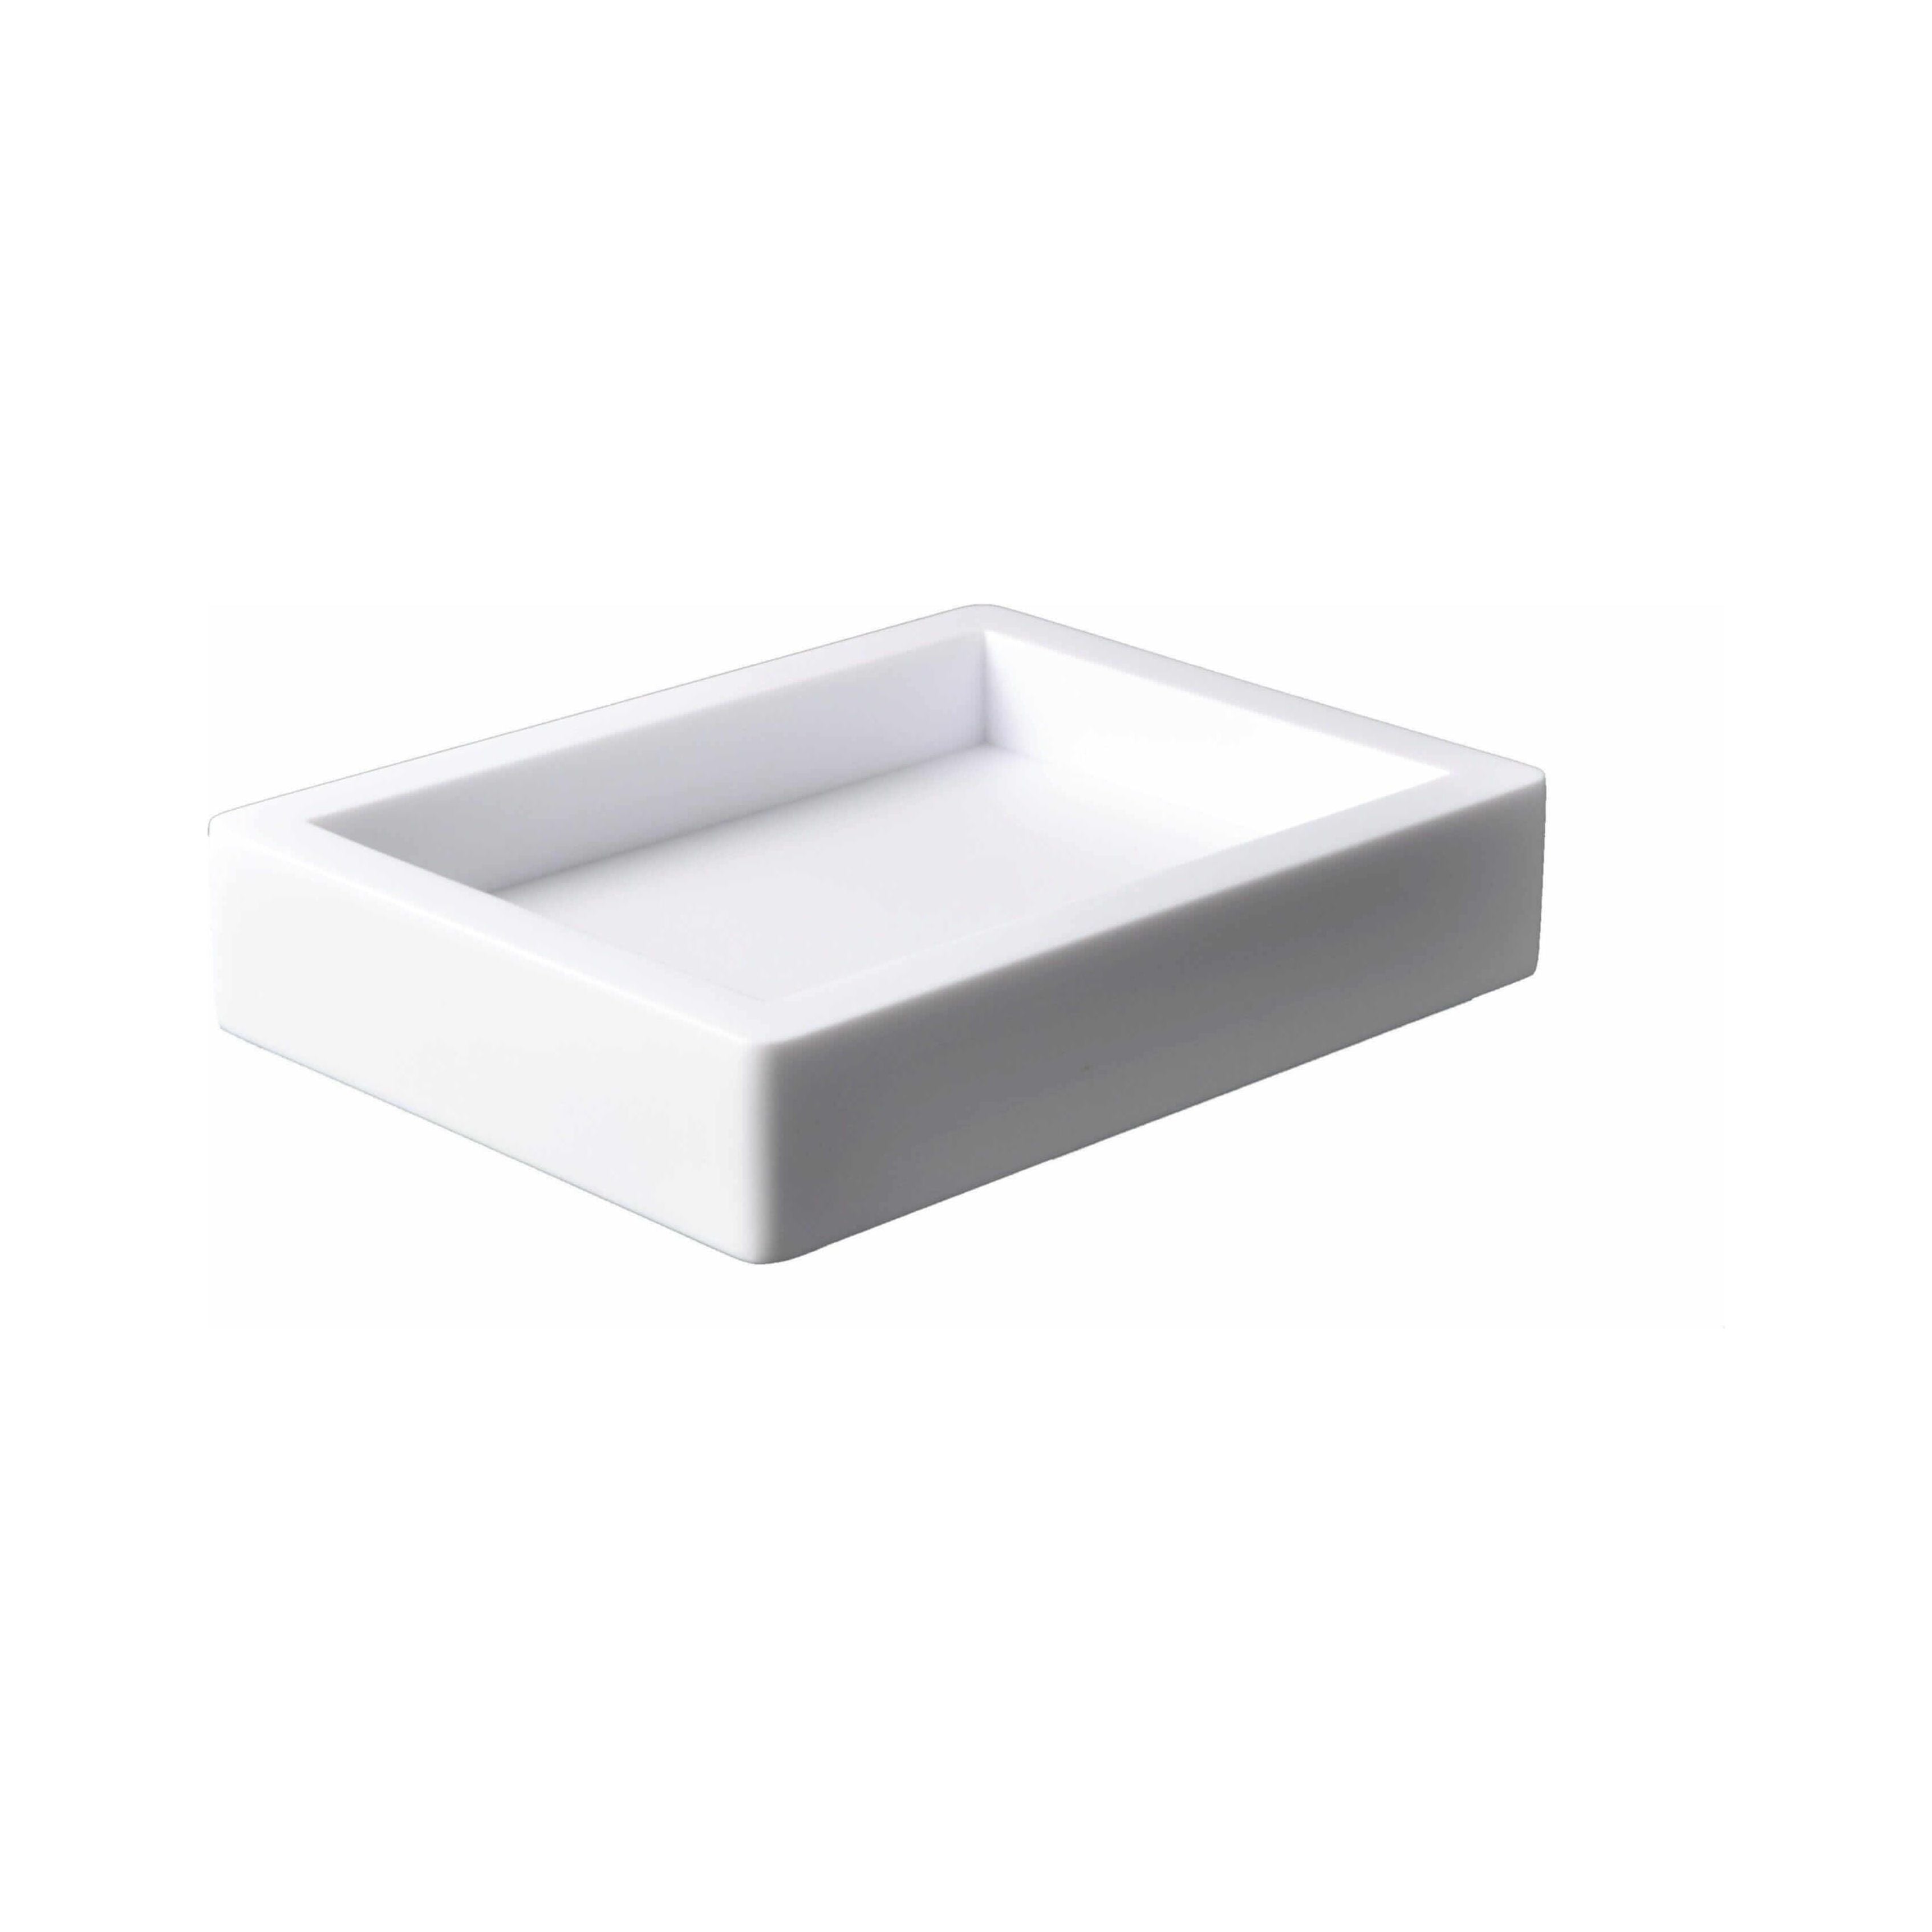 Mike + Ally - Contours Soap Dish - 52031 - White - 